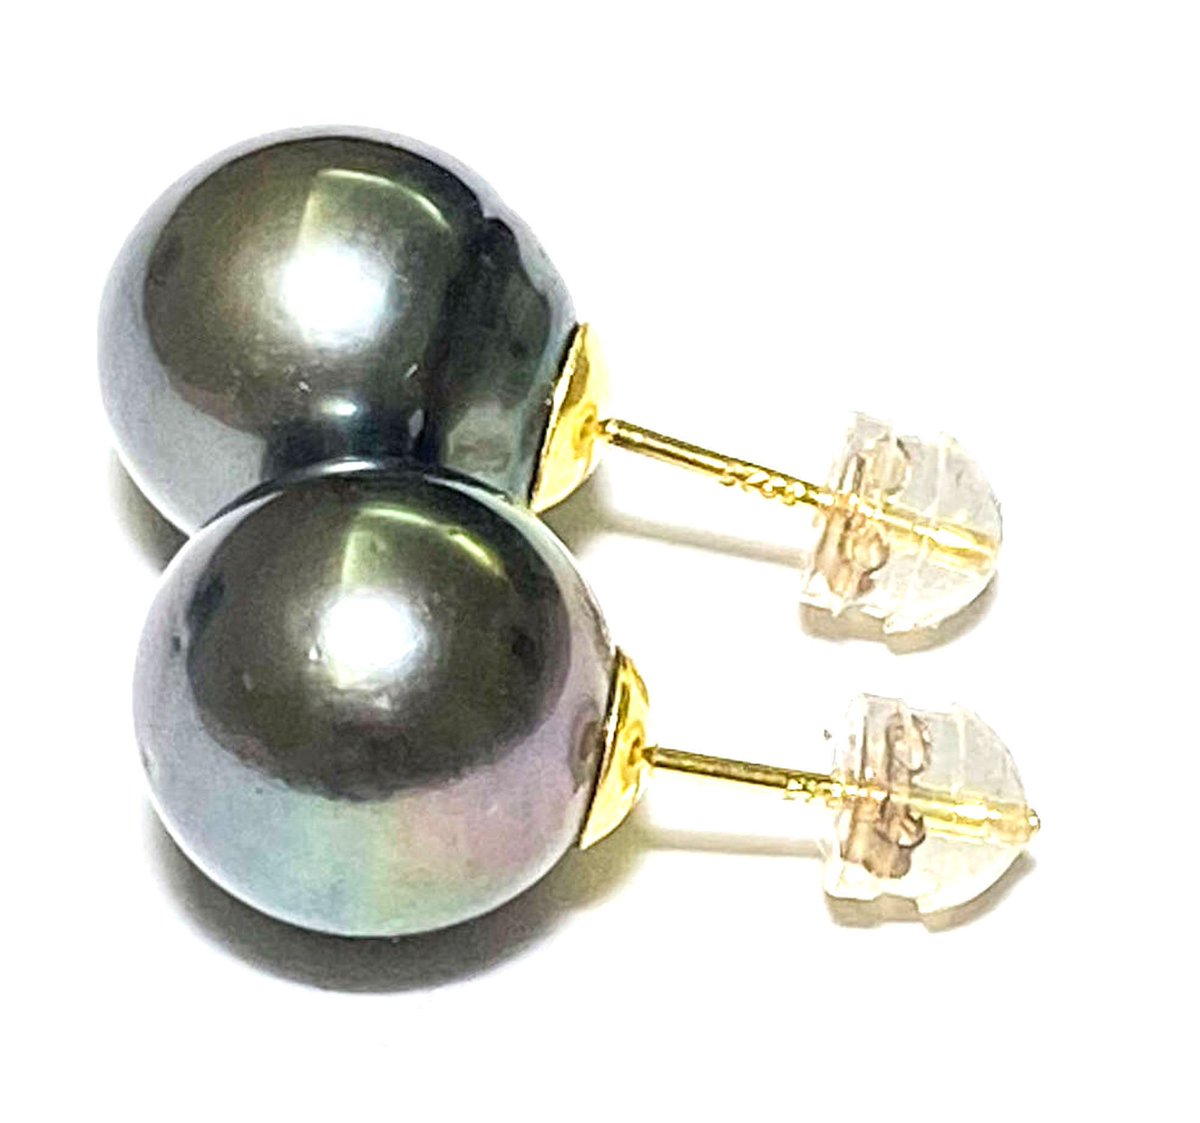 Excited to share the latest addition to my #etsy shop: Classic Stud Stylish Tahitian 11.7mm Pearl Earrings / Natural Peacock Gray Green Overtone Round Pearl Earrings / Trend Birthday Earrings https://t.co/YIHoklIeji #women #cartilage #victorian #leverback #silver #yes https://t.co/YUzbtVBB3l